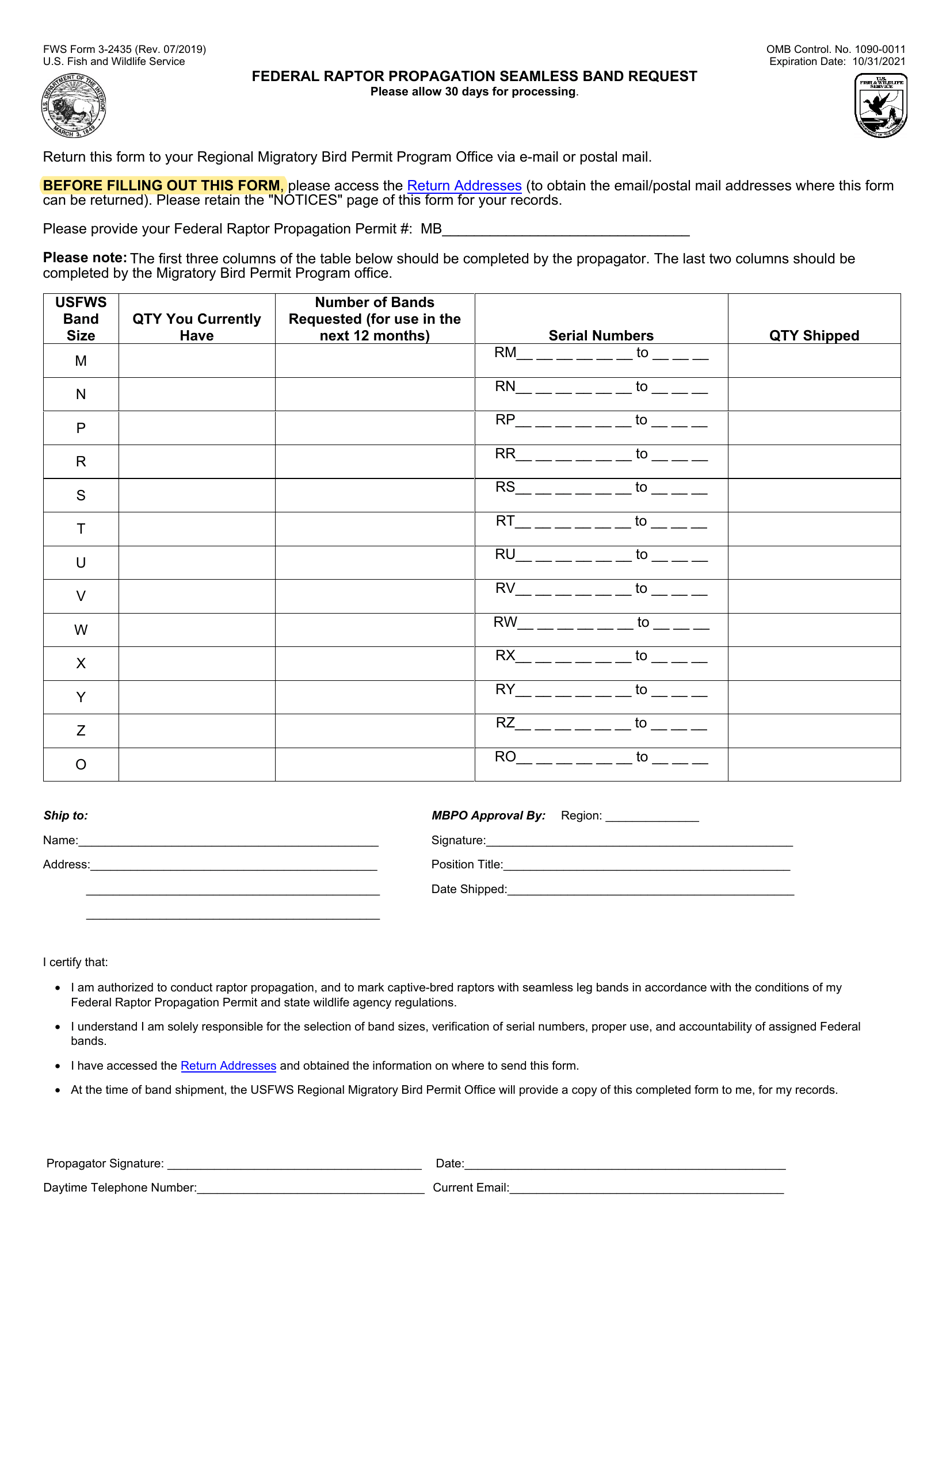 FWS Form 3-2435 Federal Raptor Propagation Seamless Band Request, Page 1